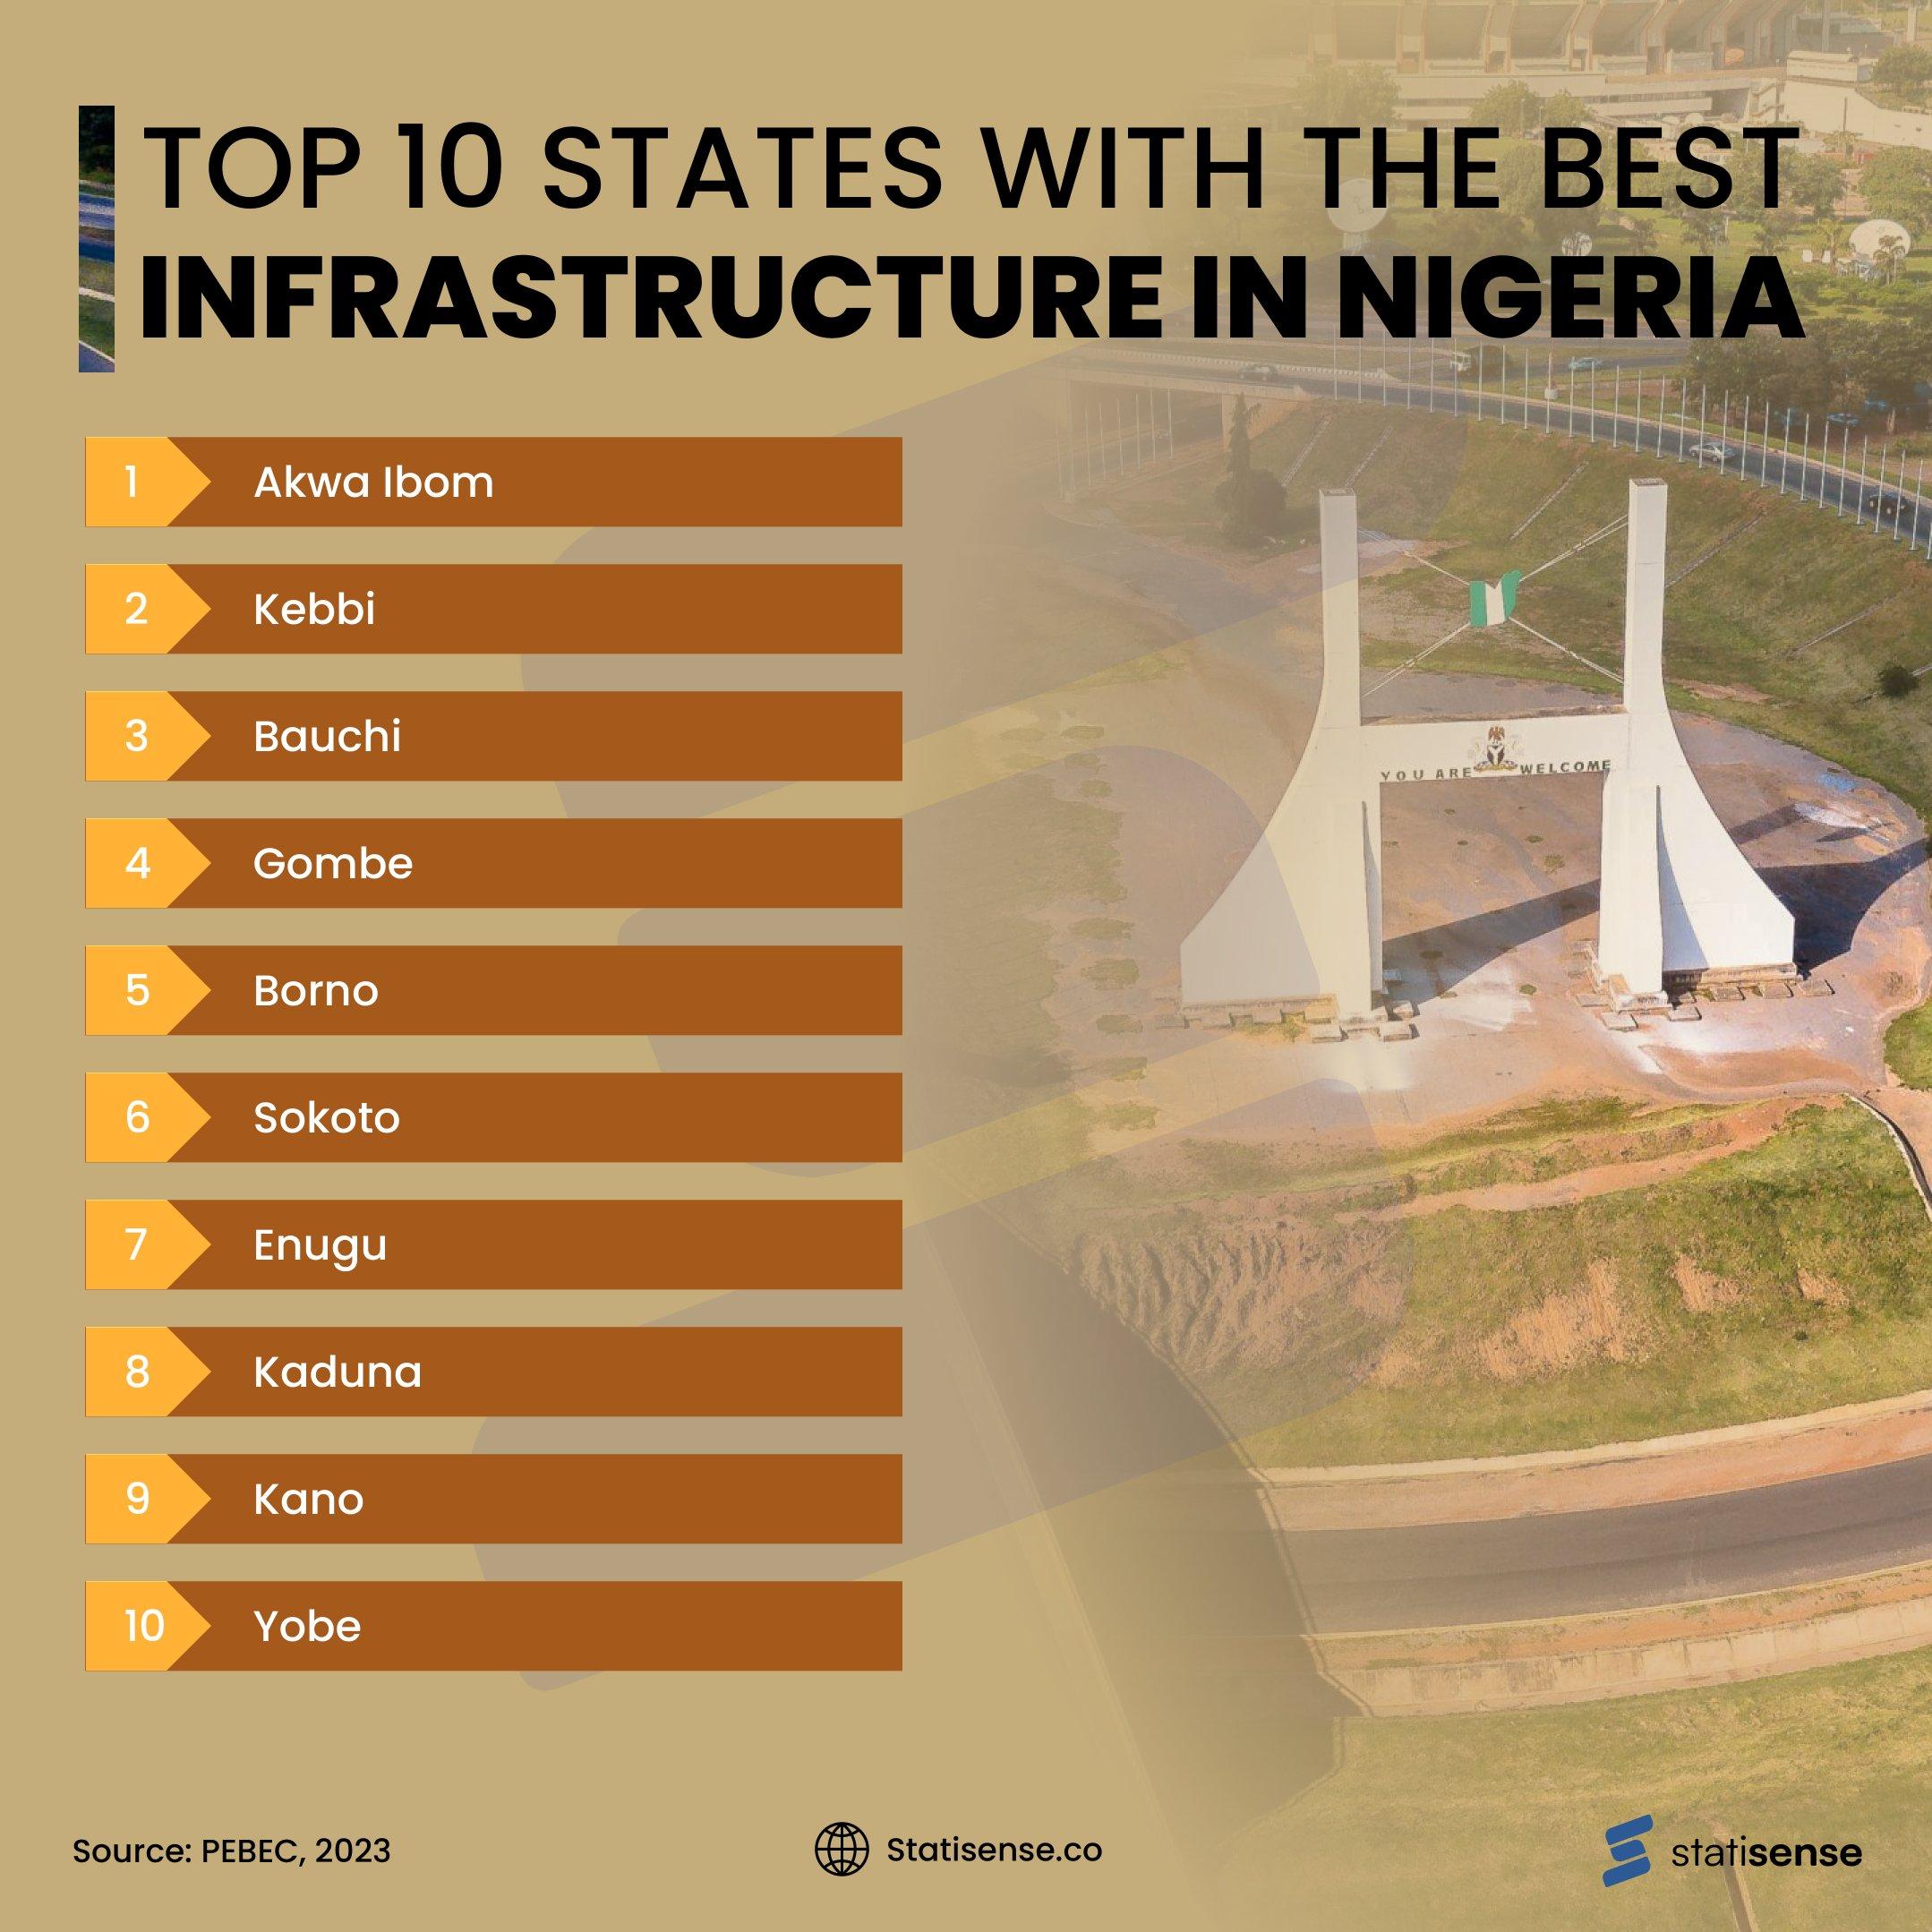 Top 10 States with best infrastructure in Nigeria